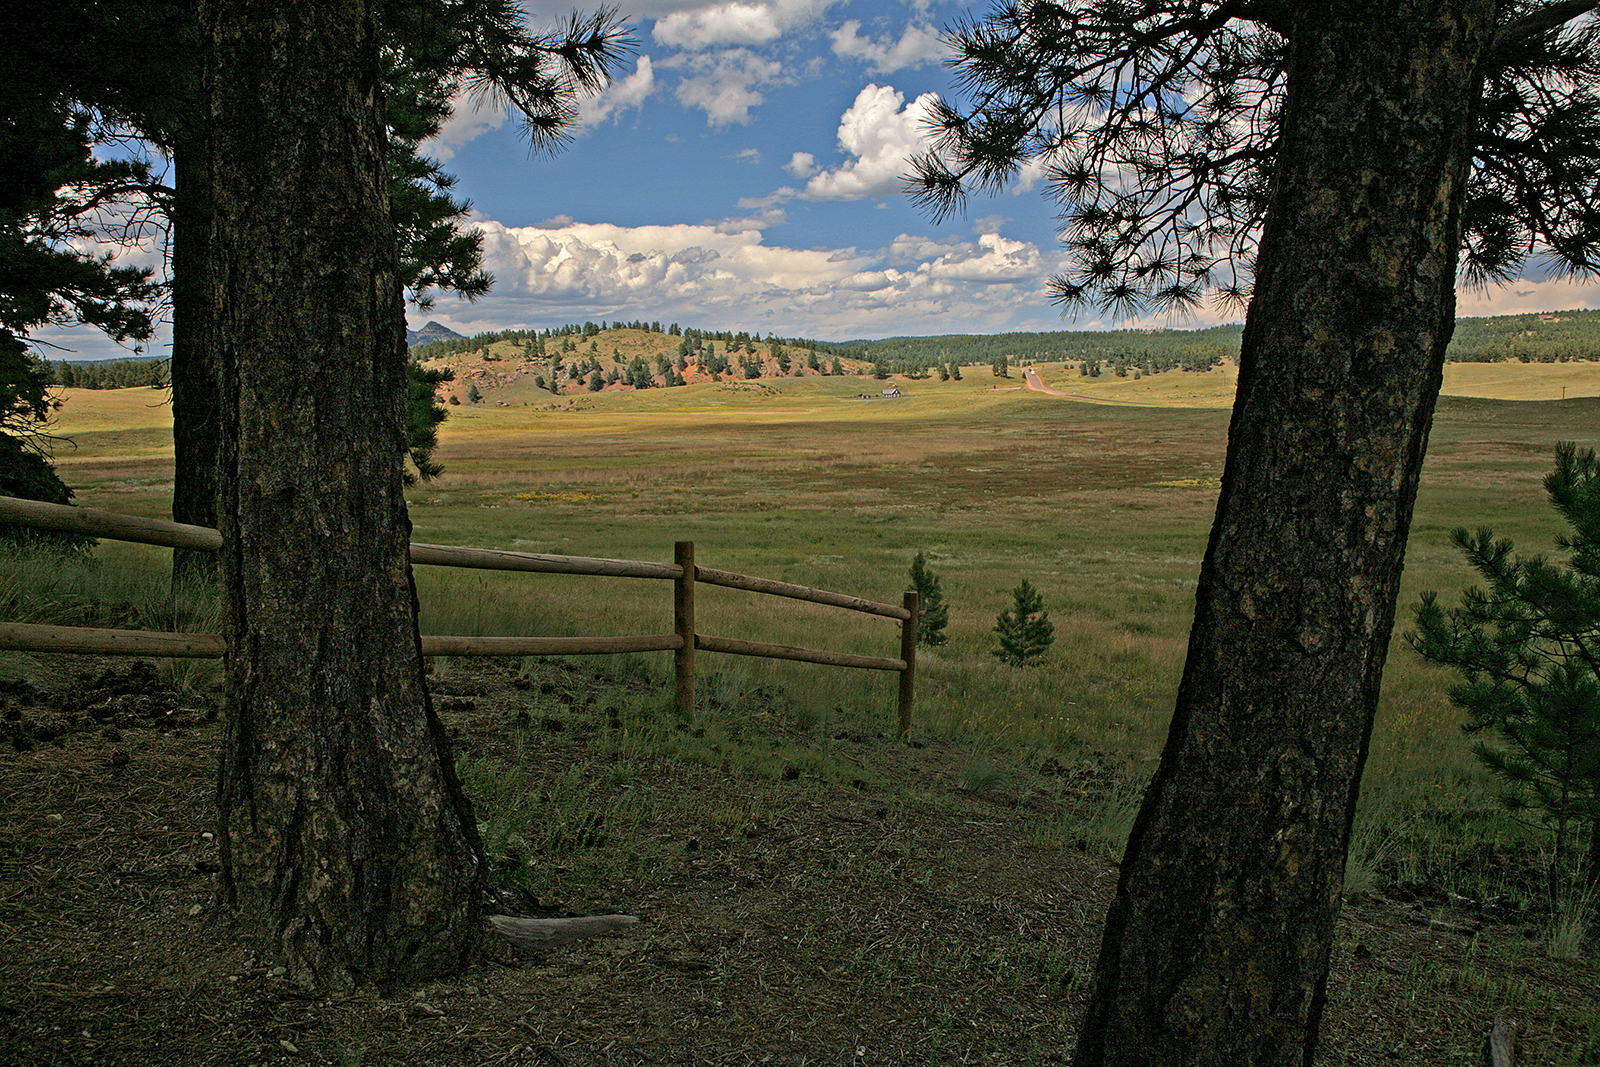 Florissant Fossil Beds National Monument